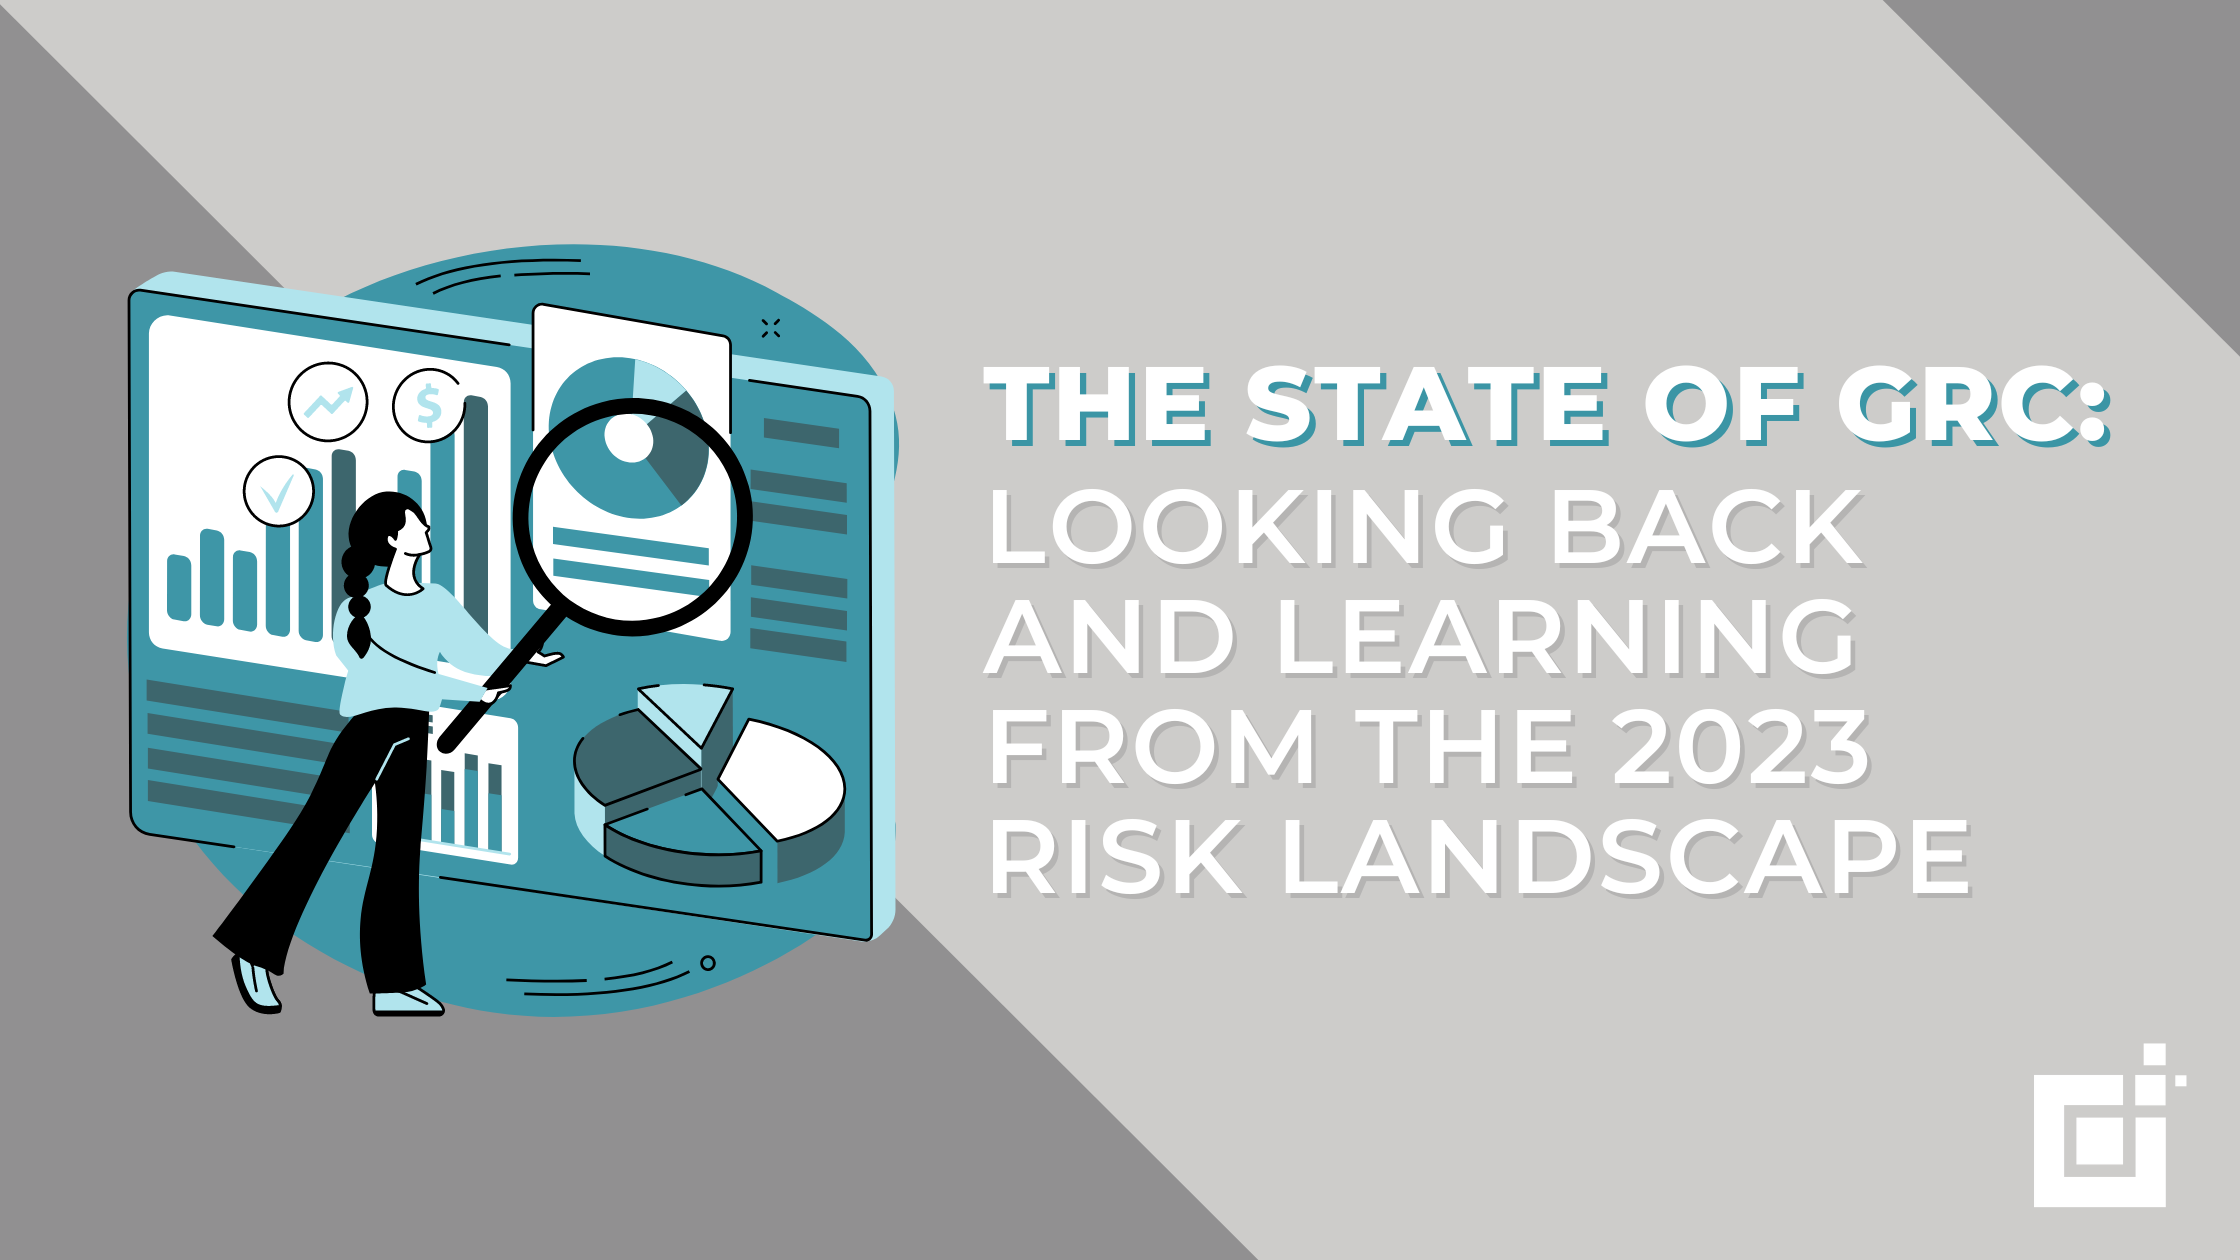 The State Of GRC: Looking Back and Learning From The 2023 Risk Landscape